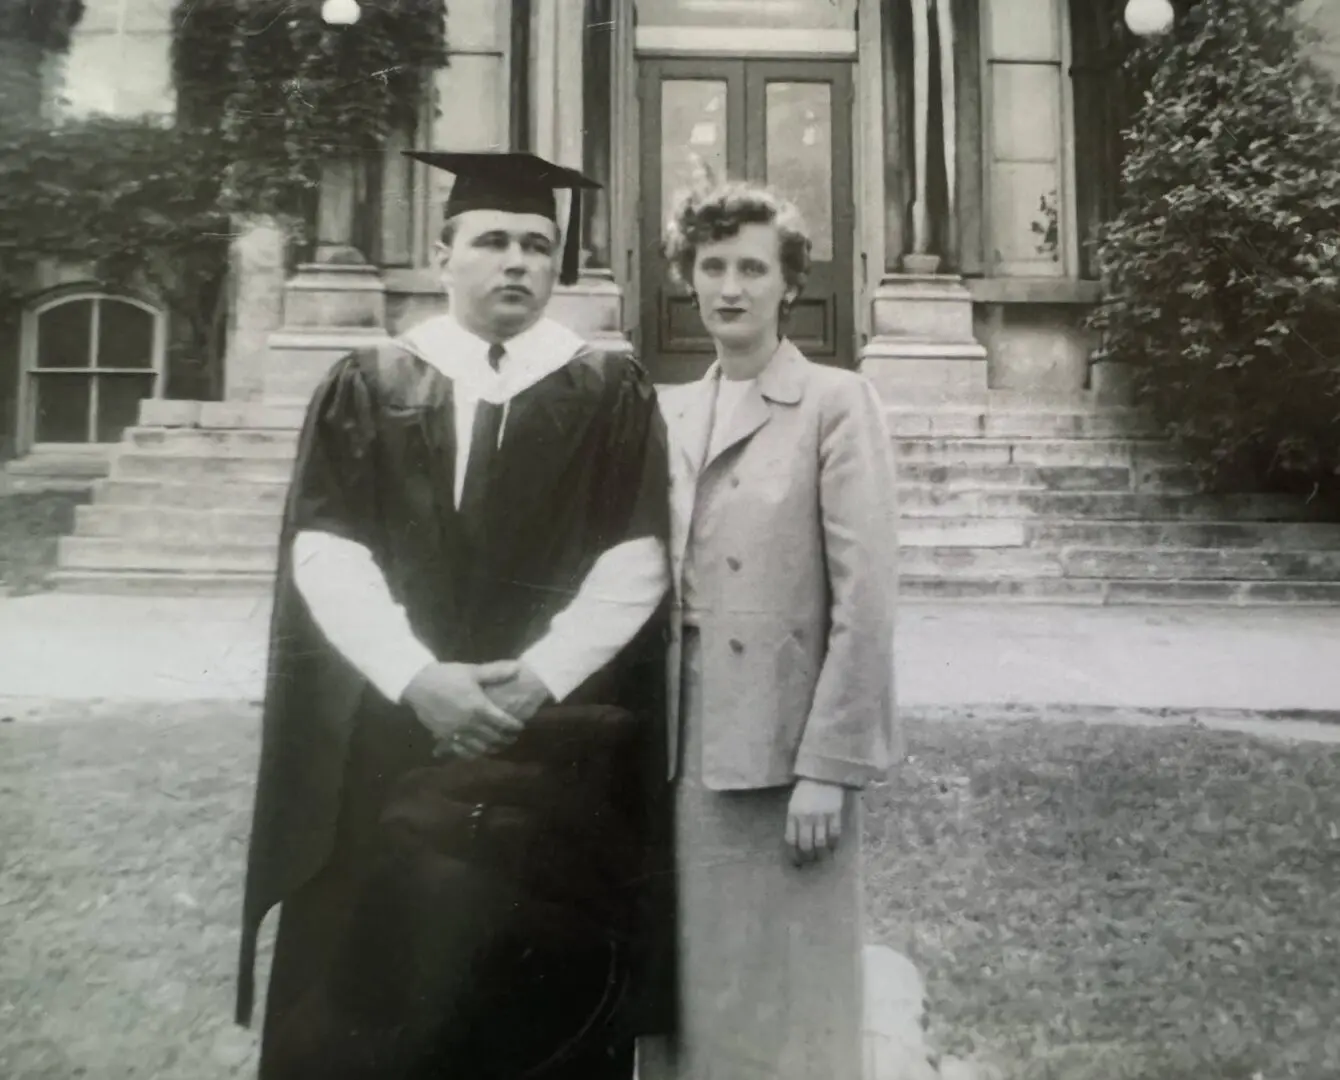 A man and woman in graduation attire standing outside.